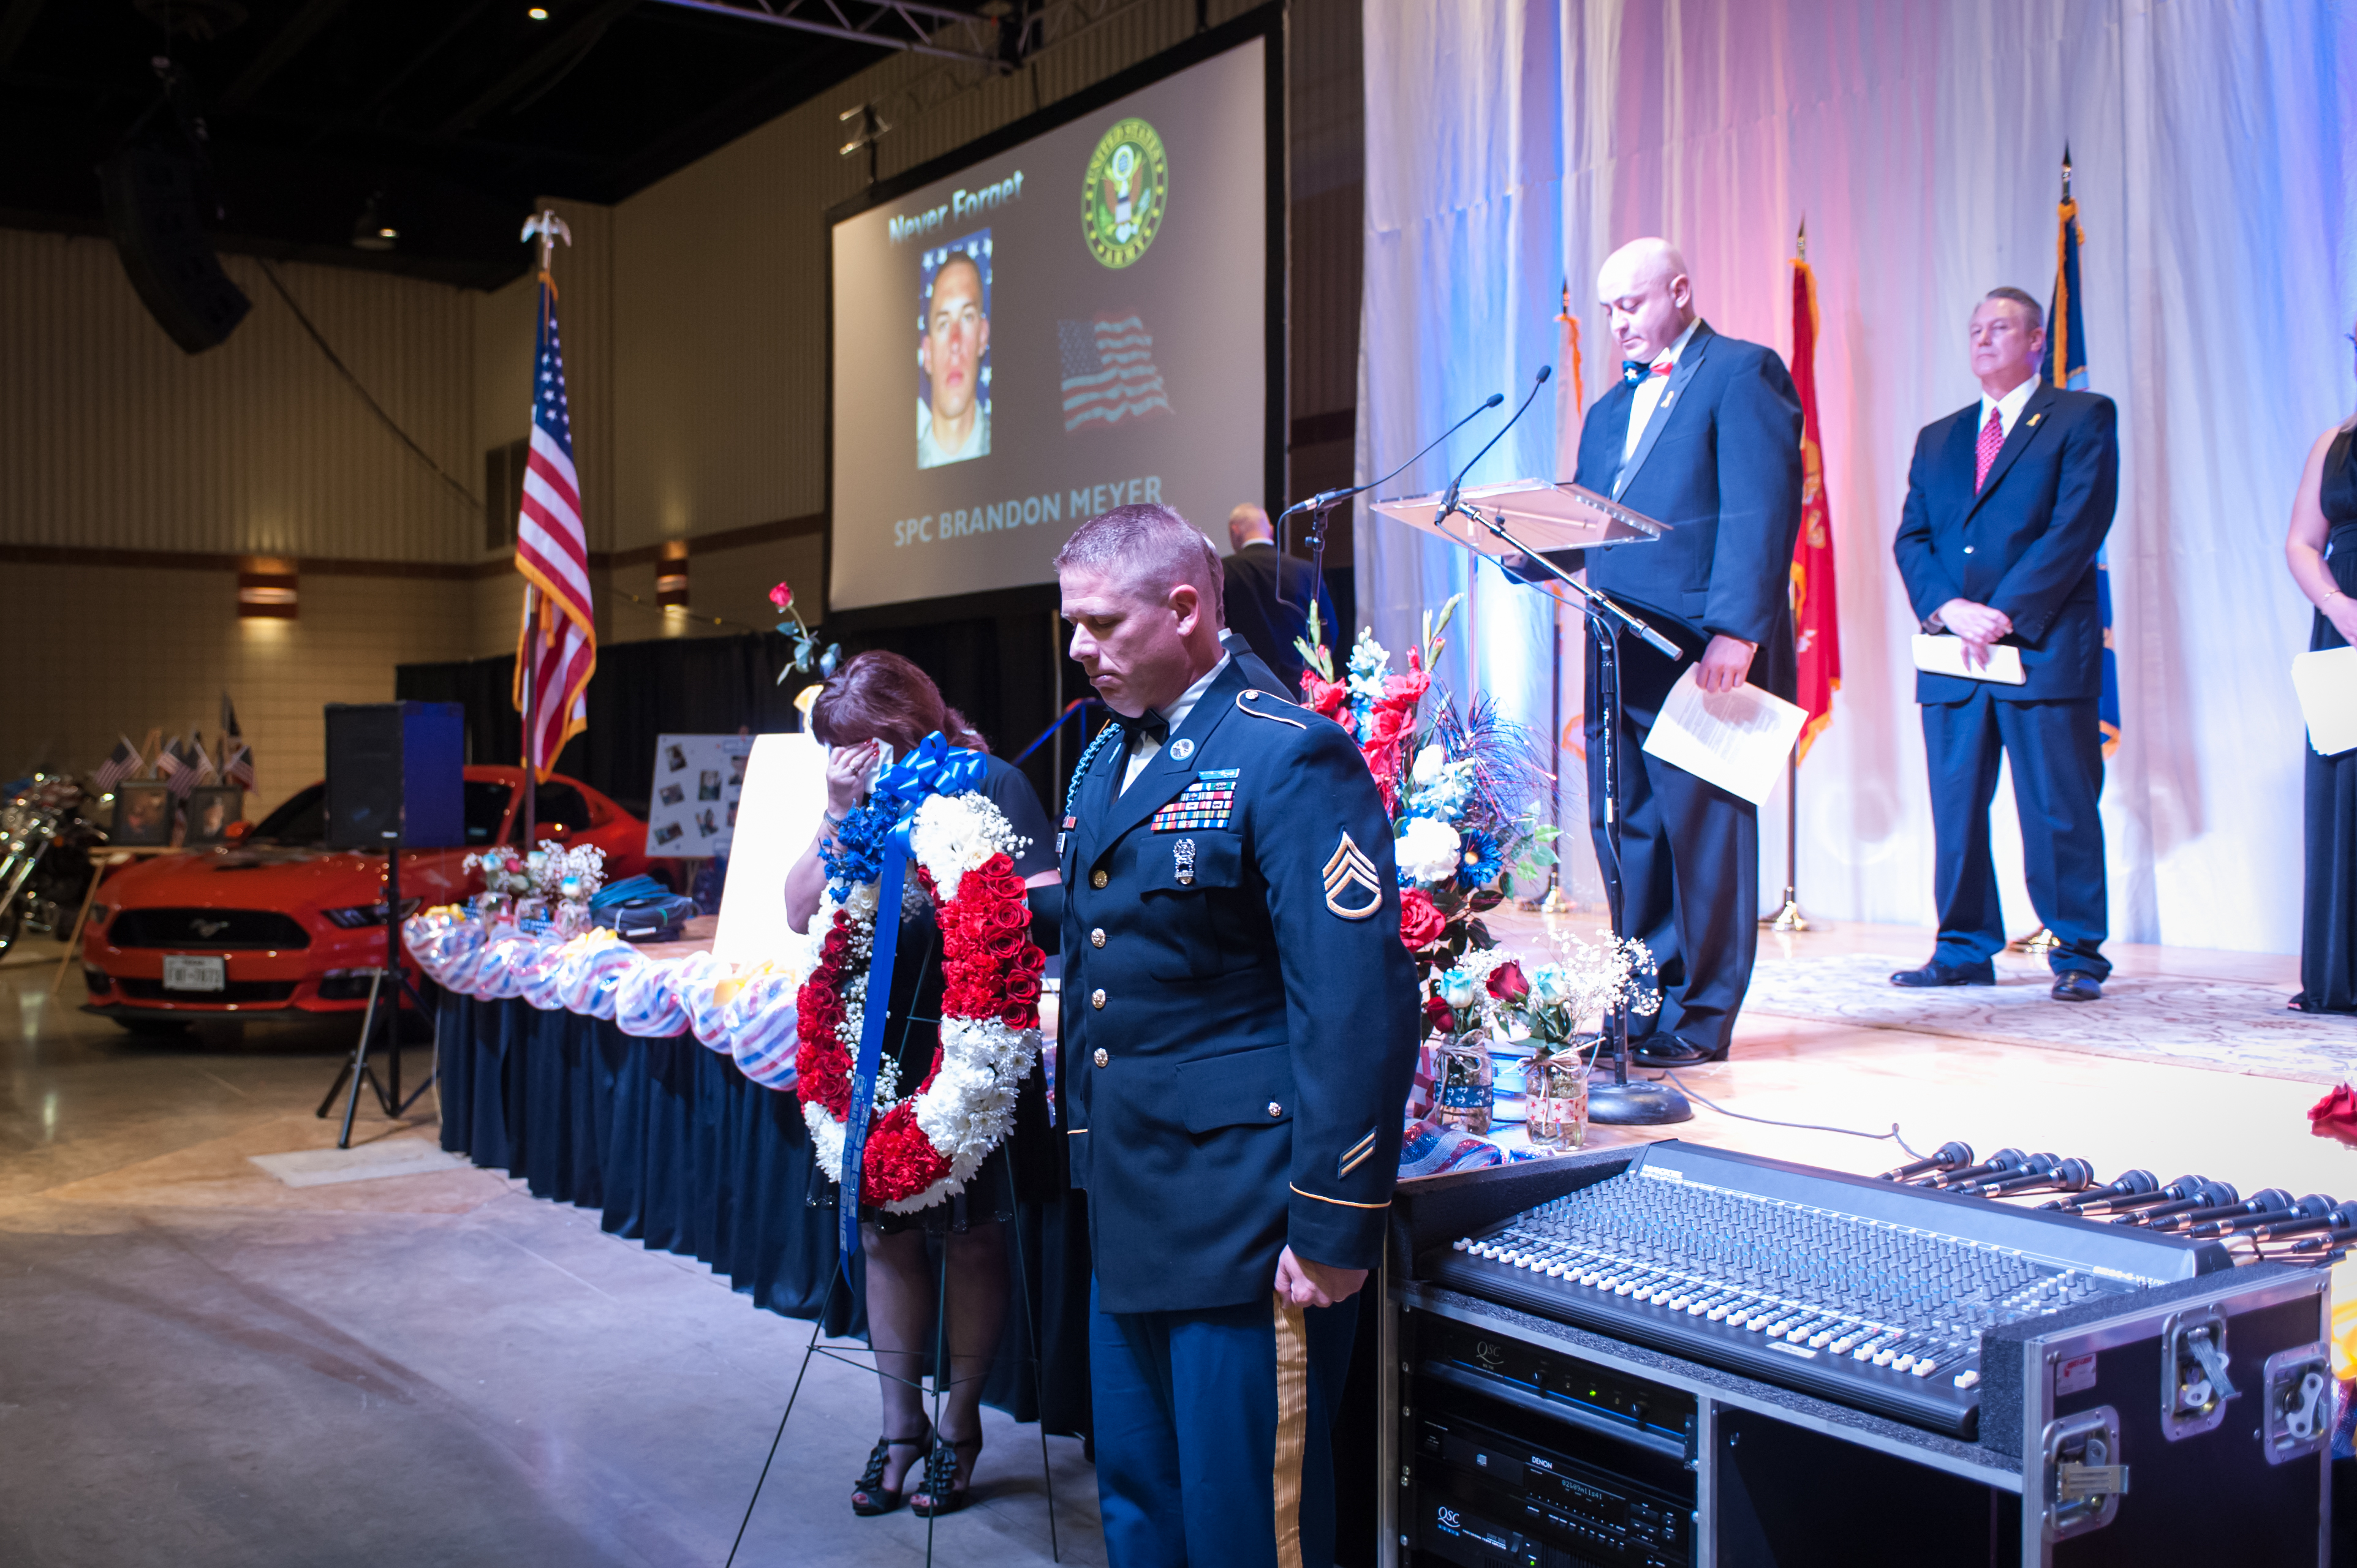 Shaie Williams for AGN Media. Displaying the Wreath for the fallen soldier at the Armed Forces Day Banquet  in Amarillo, TX Held at the Amarillo Civic Center on May 21, 2016.